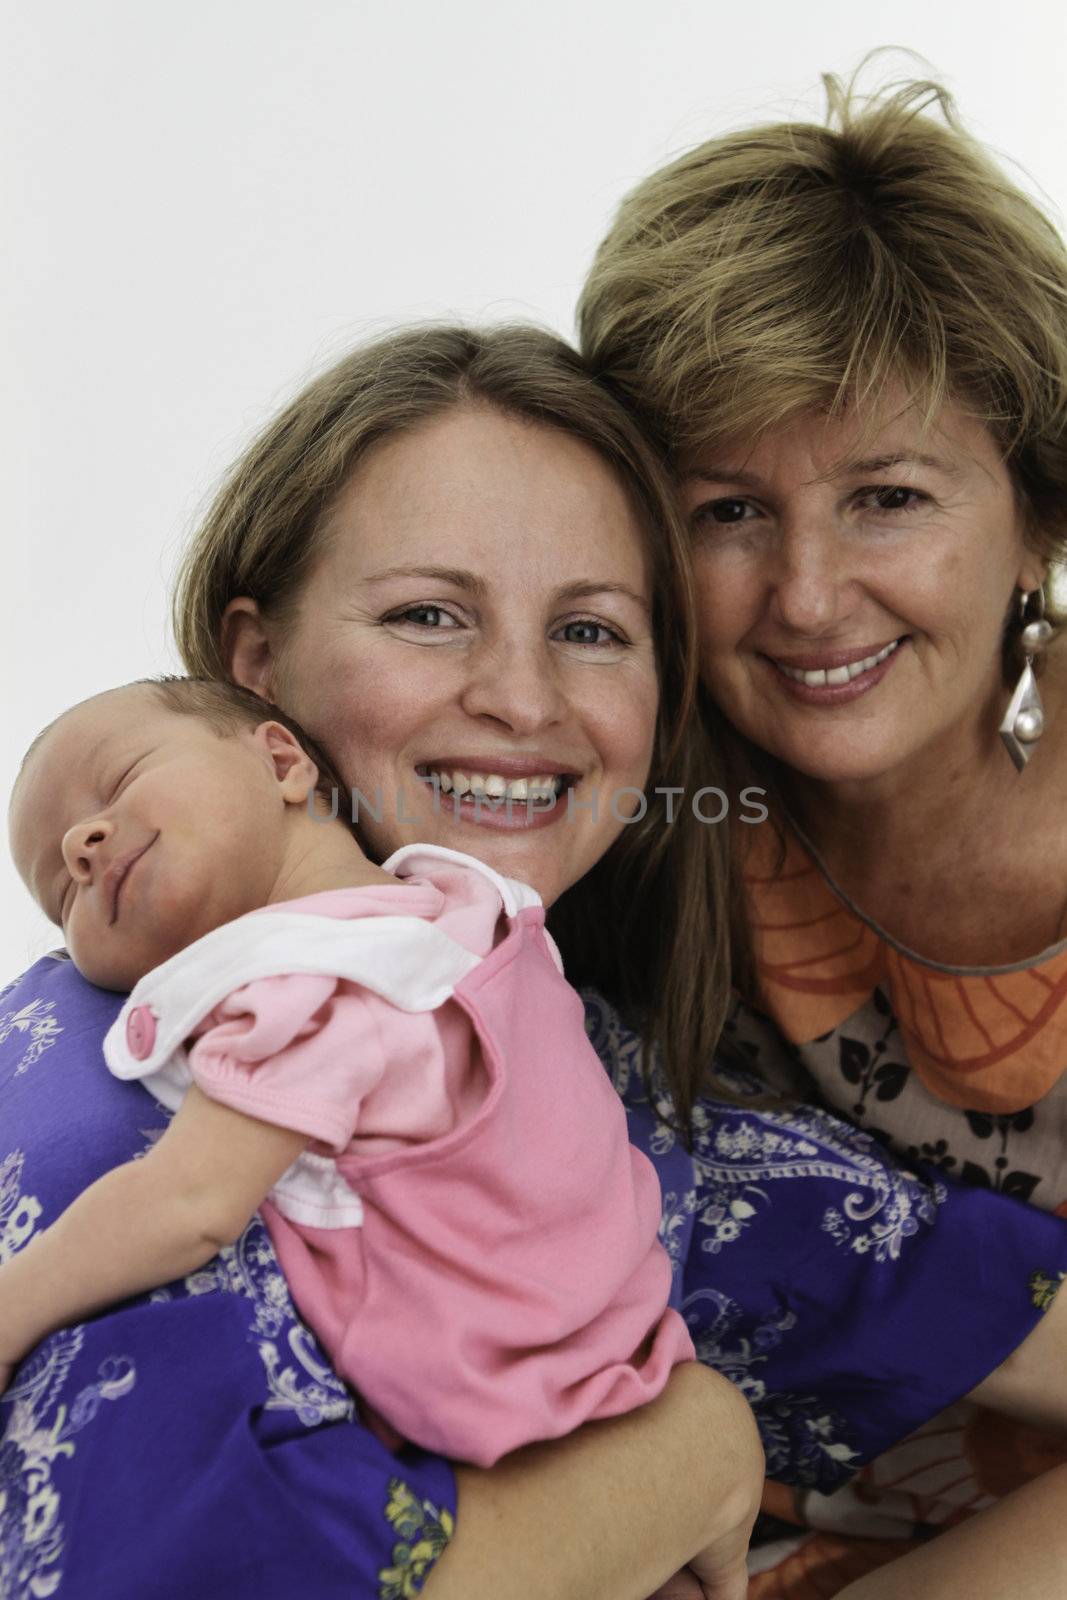 Females of three generations, Grandmother Mother and daughter all together smiling front of the white background